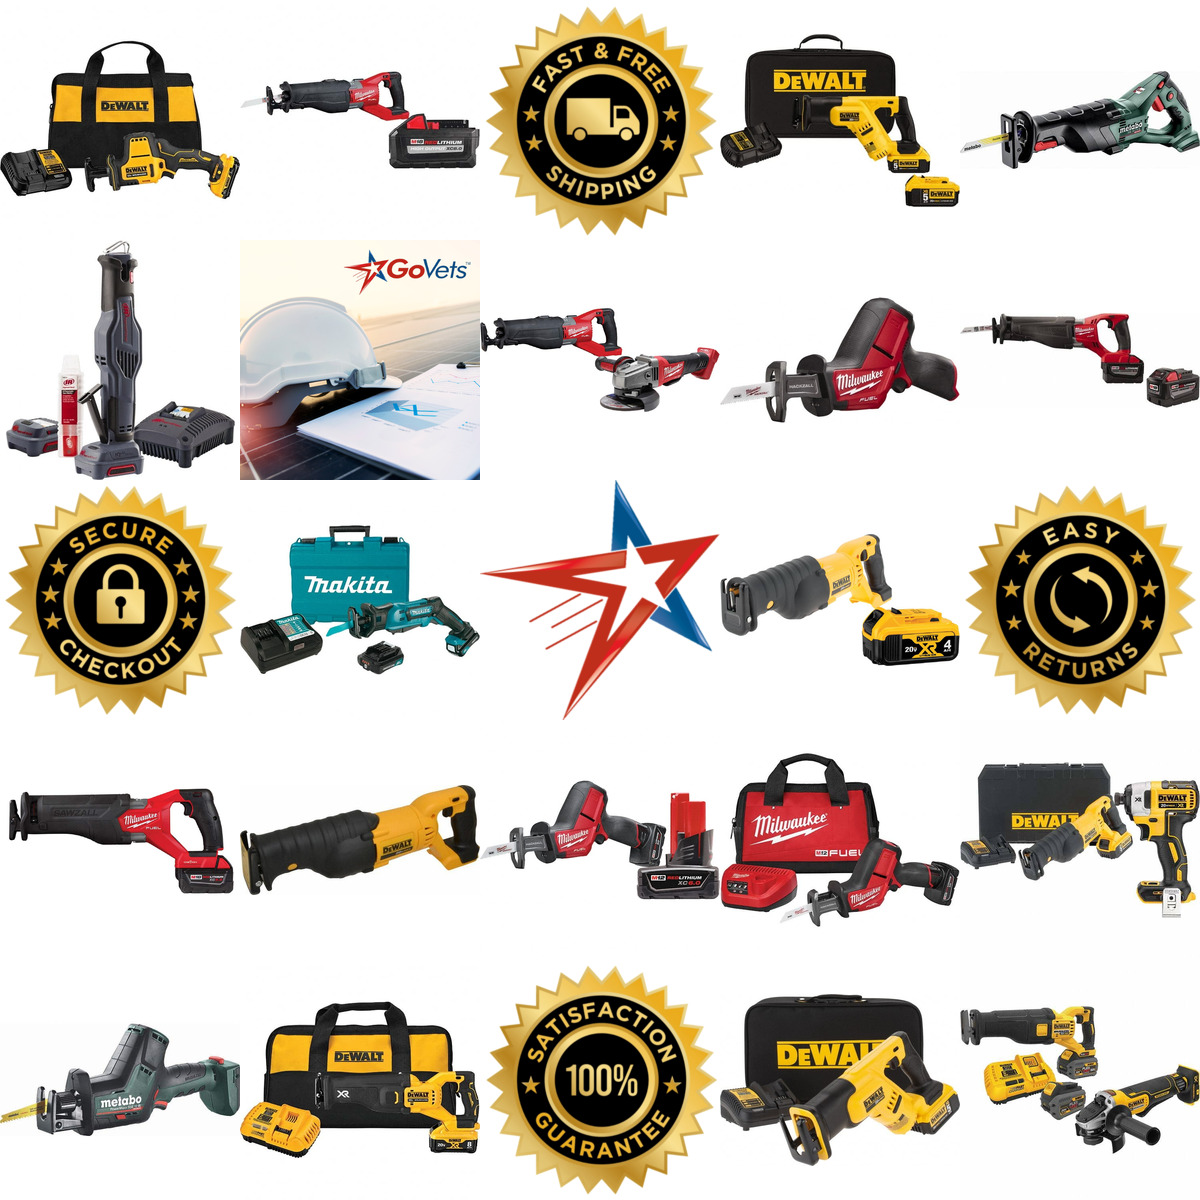 A selection of Cordless Reciprocating Saws products on GoVets